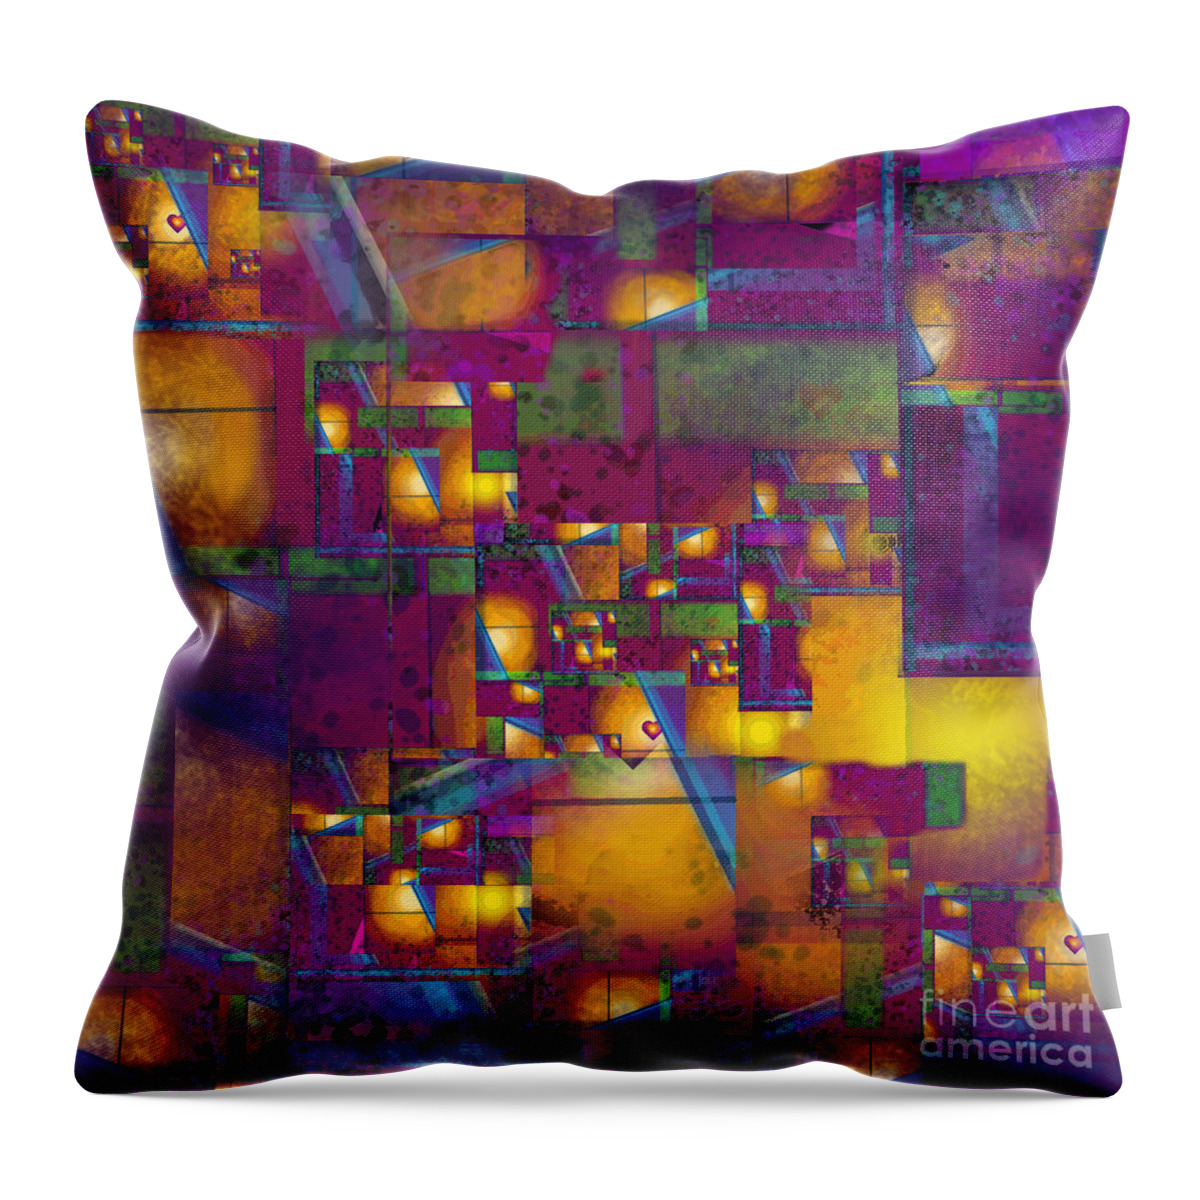 Maze Of The Heart Throw Pillow featuring the digital art Maze of the Heart by Carol Jacobs